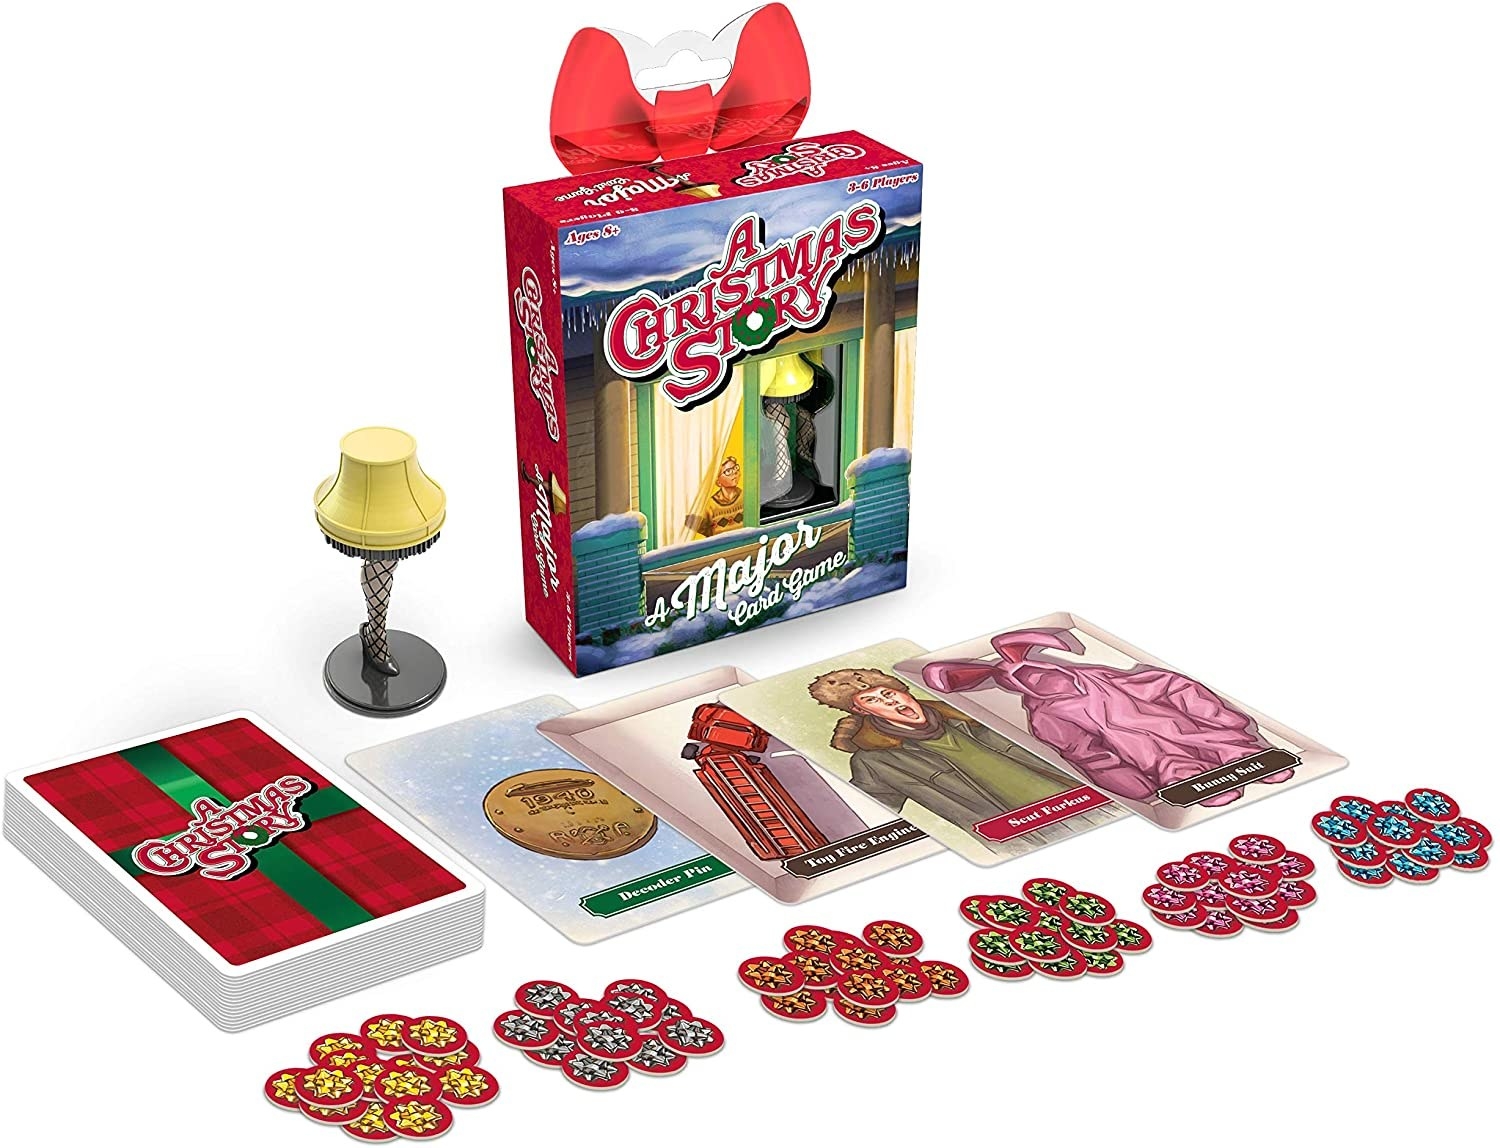 A small box with cards, chips, and a mini leg lamp from A Christmas Story